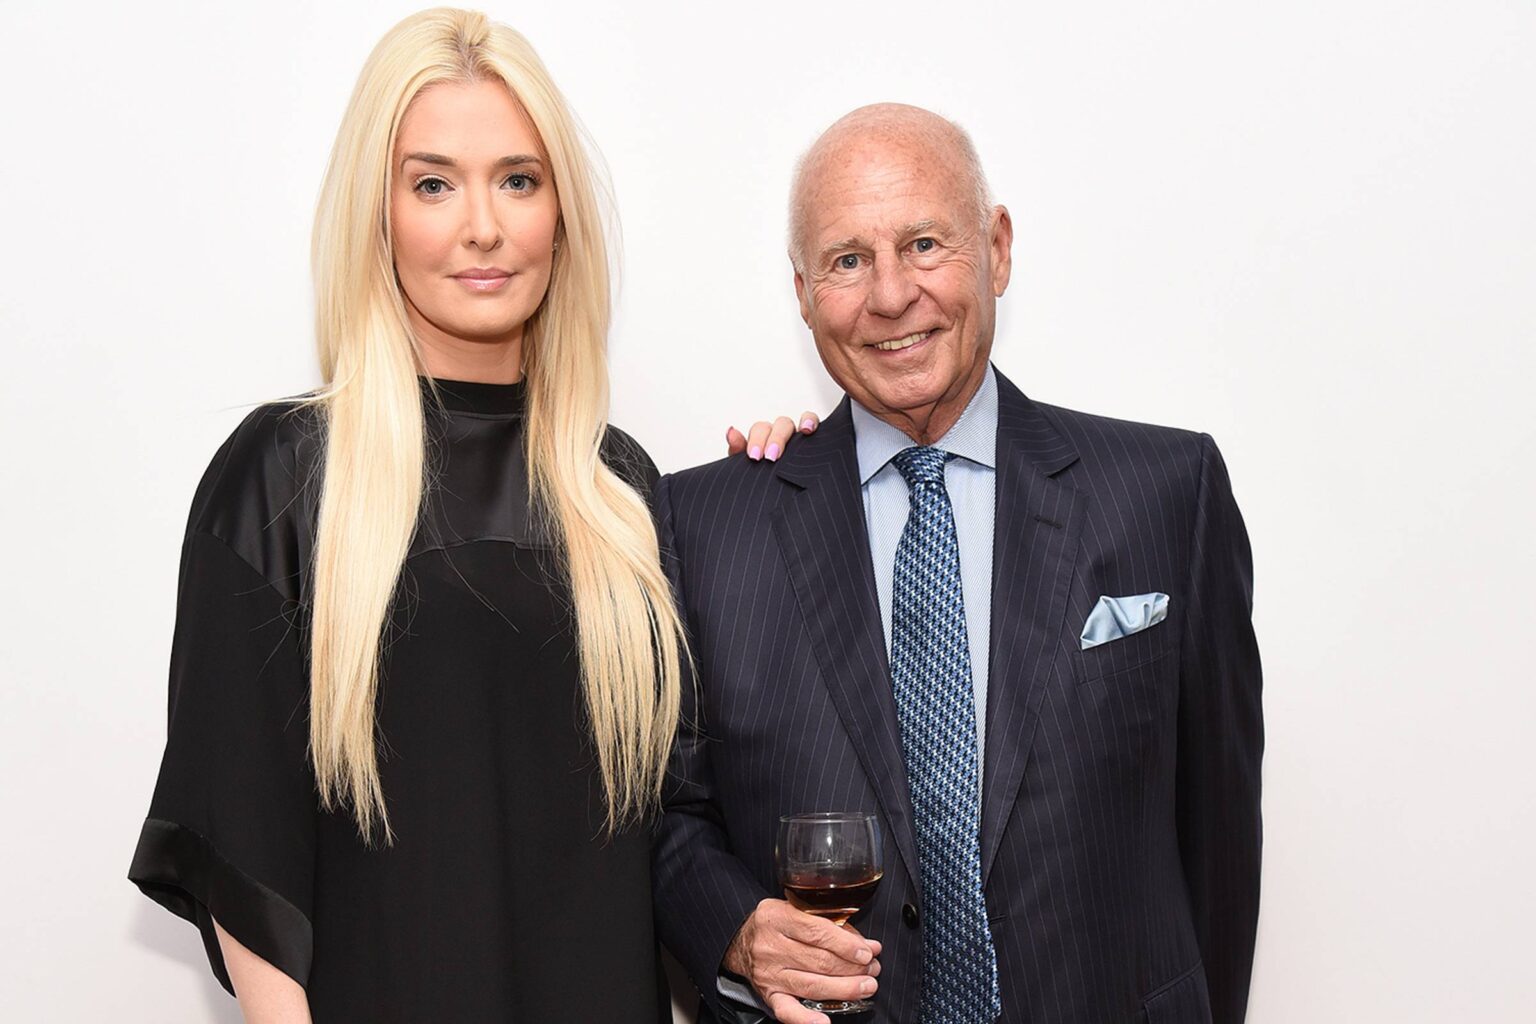 Erika Jayne and her husband are separating, but is their divorce all that is seems? Find out about the truth behind the embezzlement allegations.